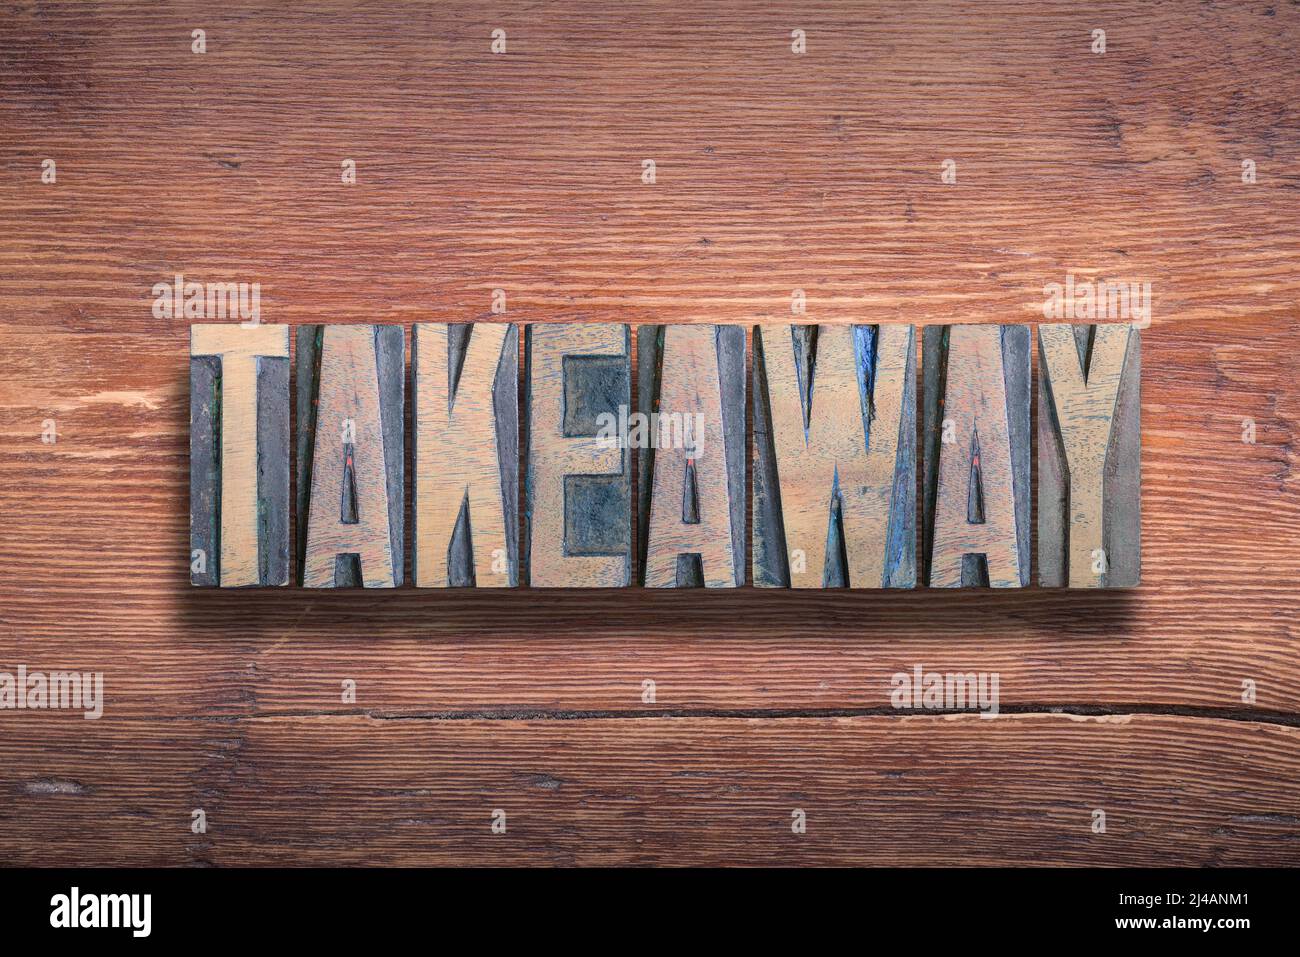 takeaway word combined on vintage varnished wooden surface Stock Photo